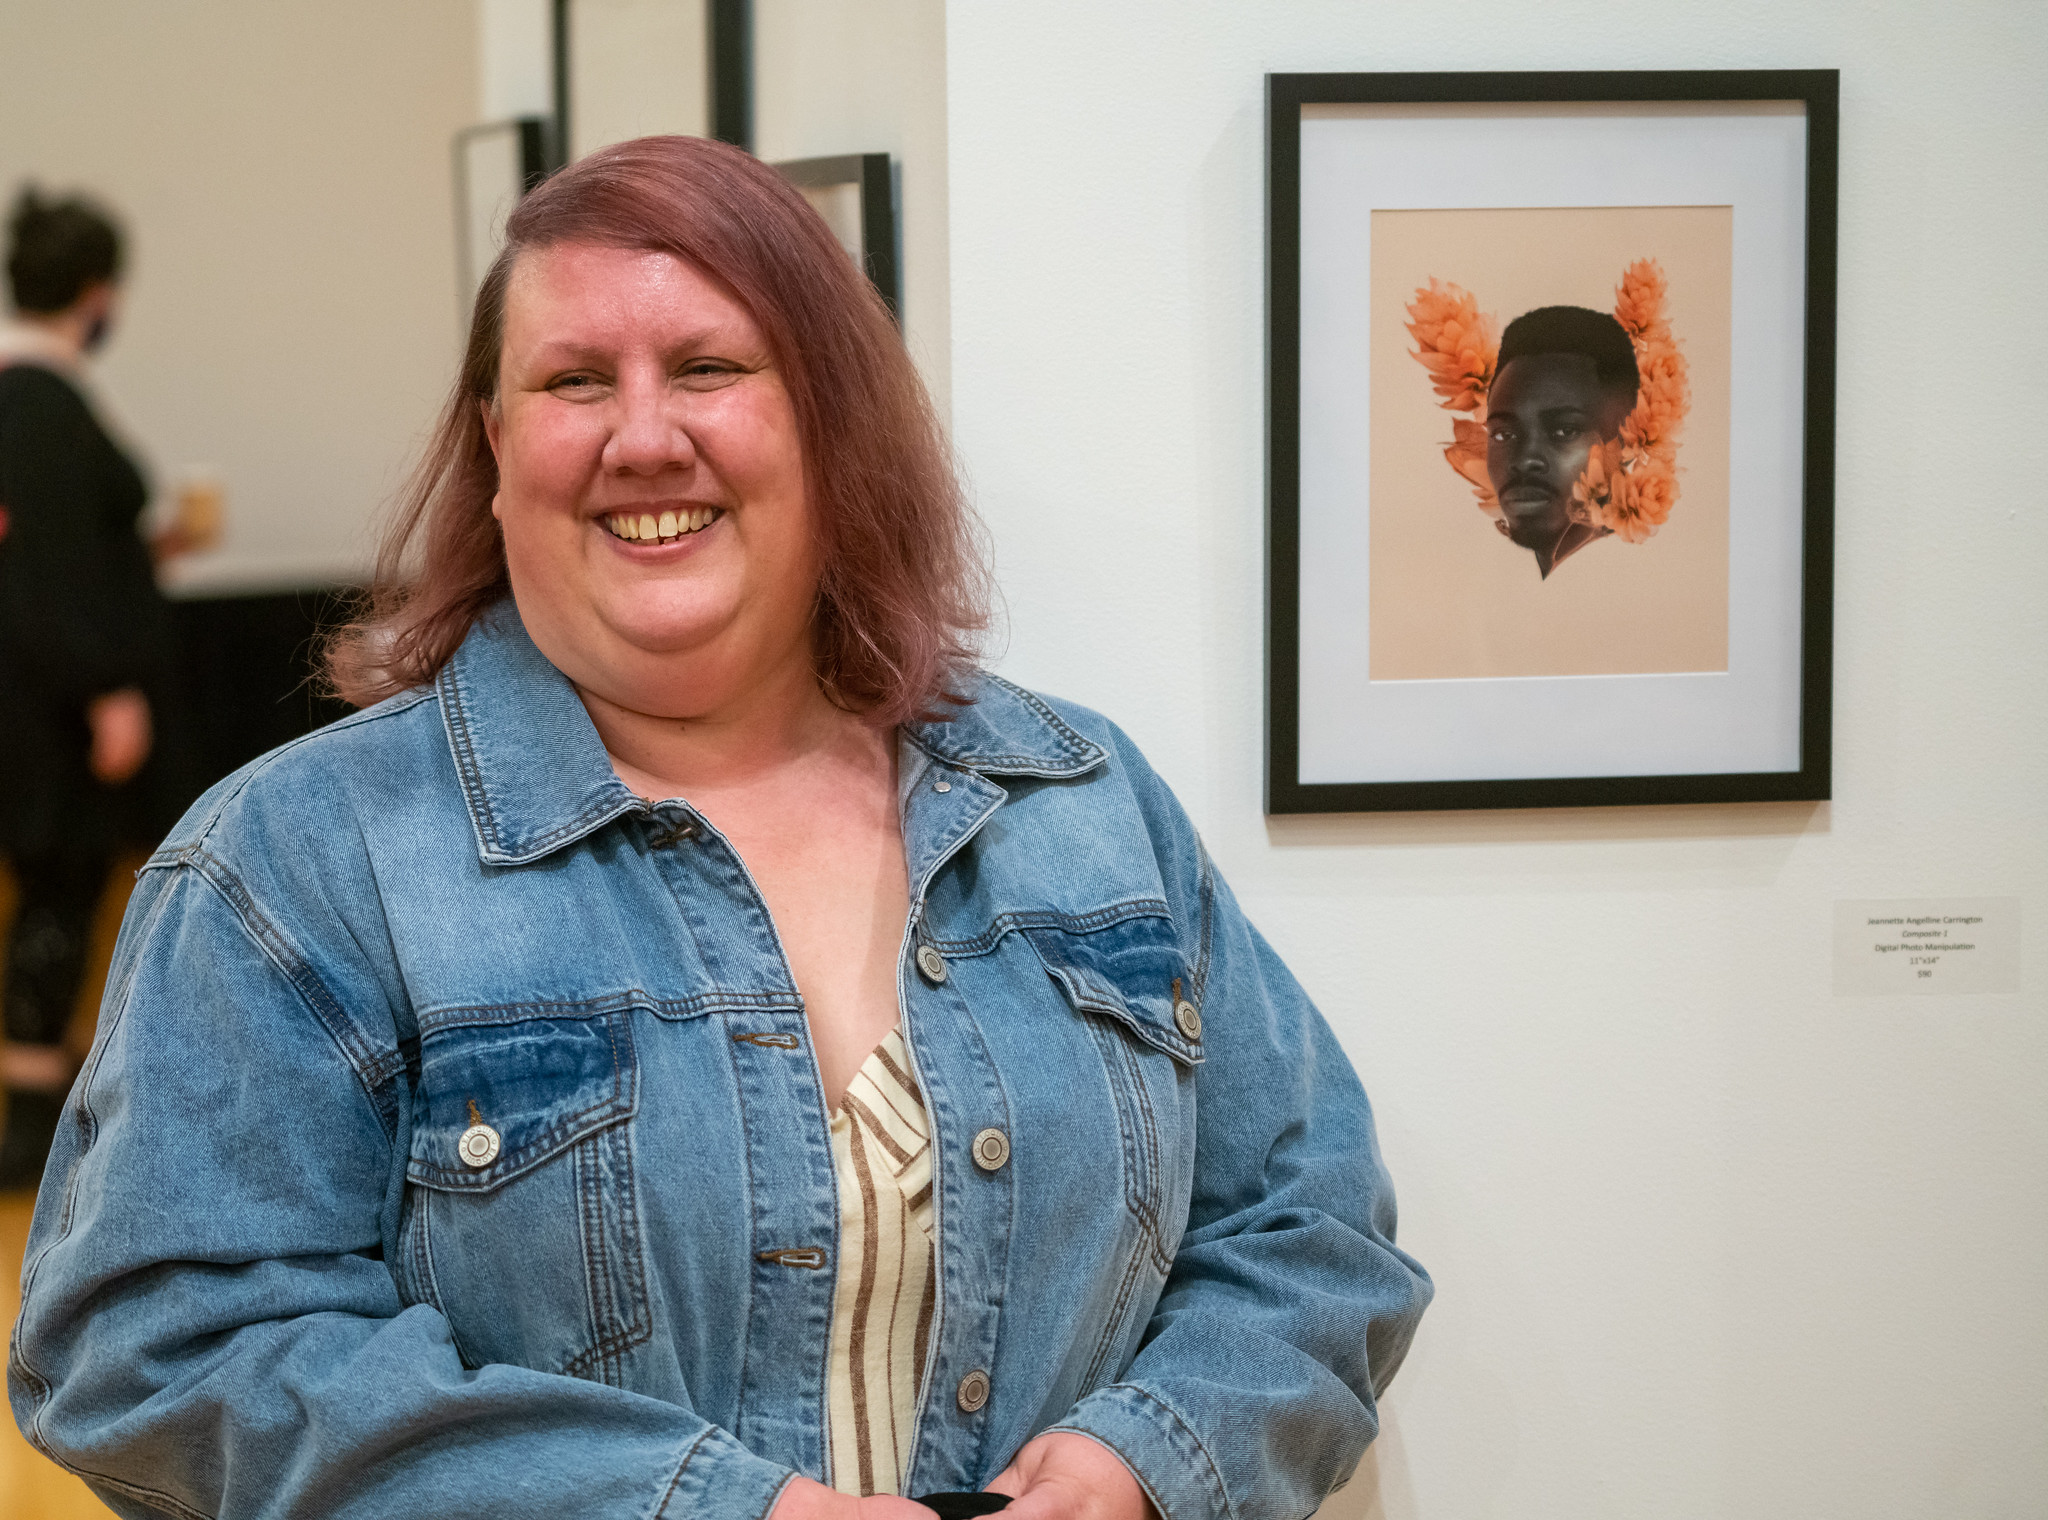 Jeannette Angeline Carrington took home the top prize in the 2022 exhibit with her work, “Composite 1.” This year’s show runs March 31-April 30. NATHAN WOODSIDE/L&C MARKETING & PR